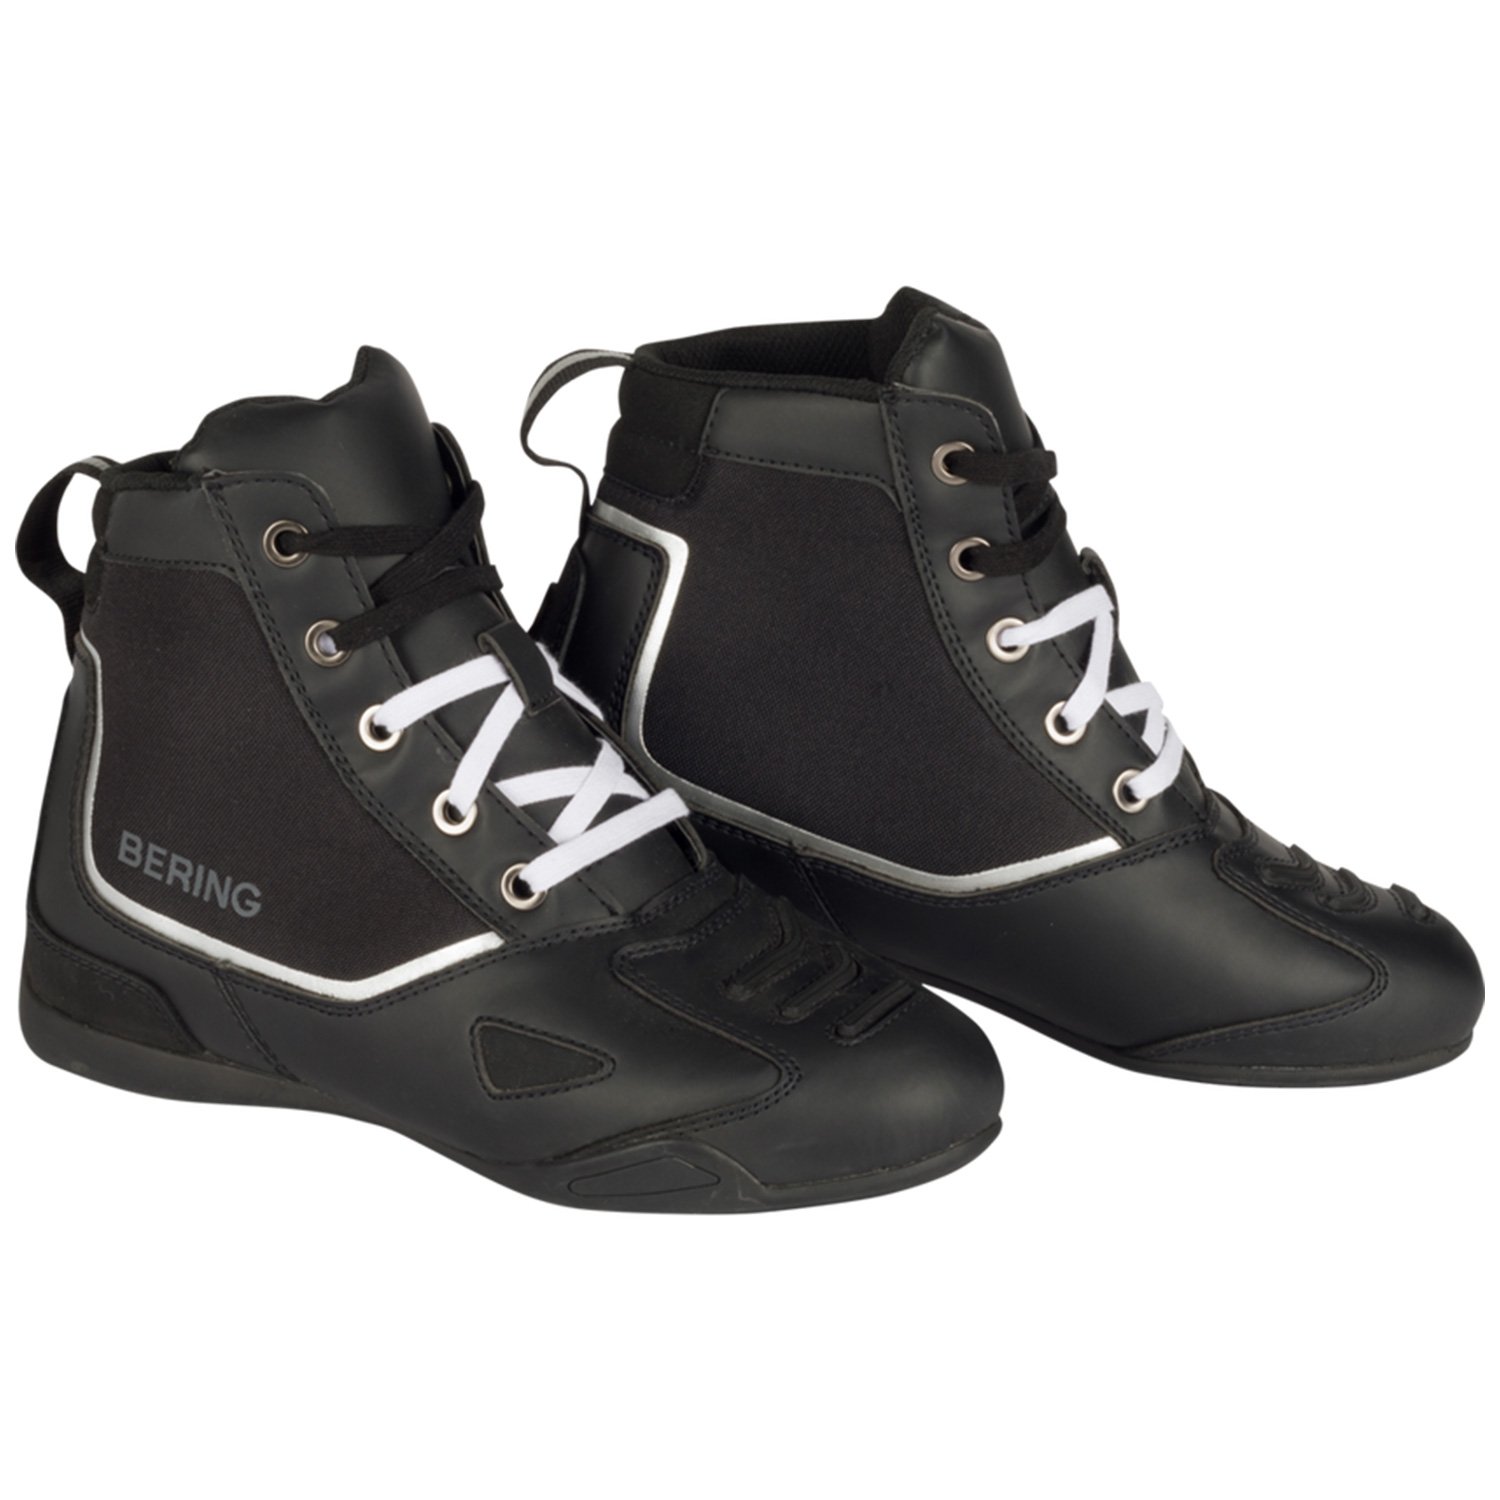 Image of Bering Active Shoes Black Size 46 ID 3660815184264